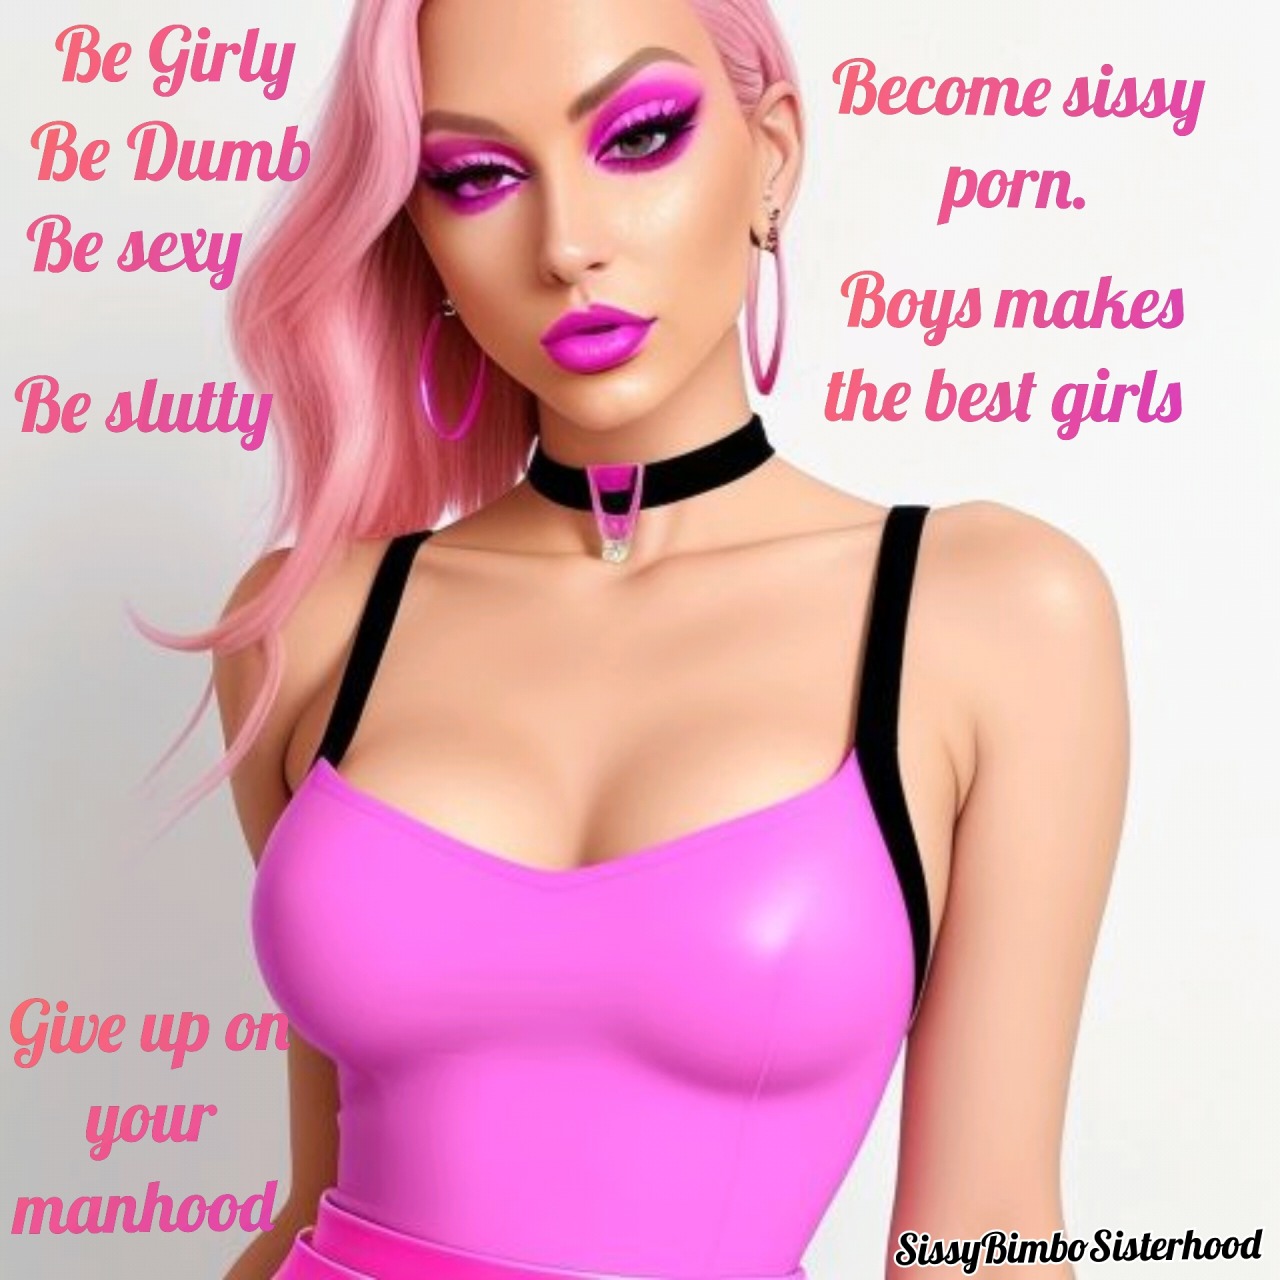 Girly Girly Girly is Me — Becoming sissy porn is the best thing that can...